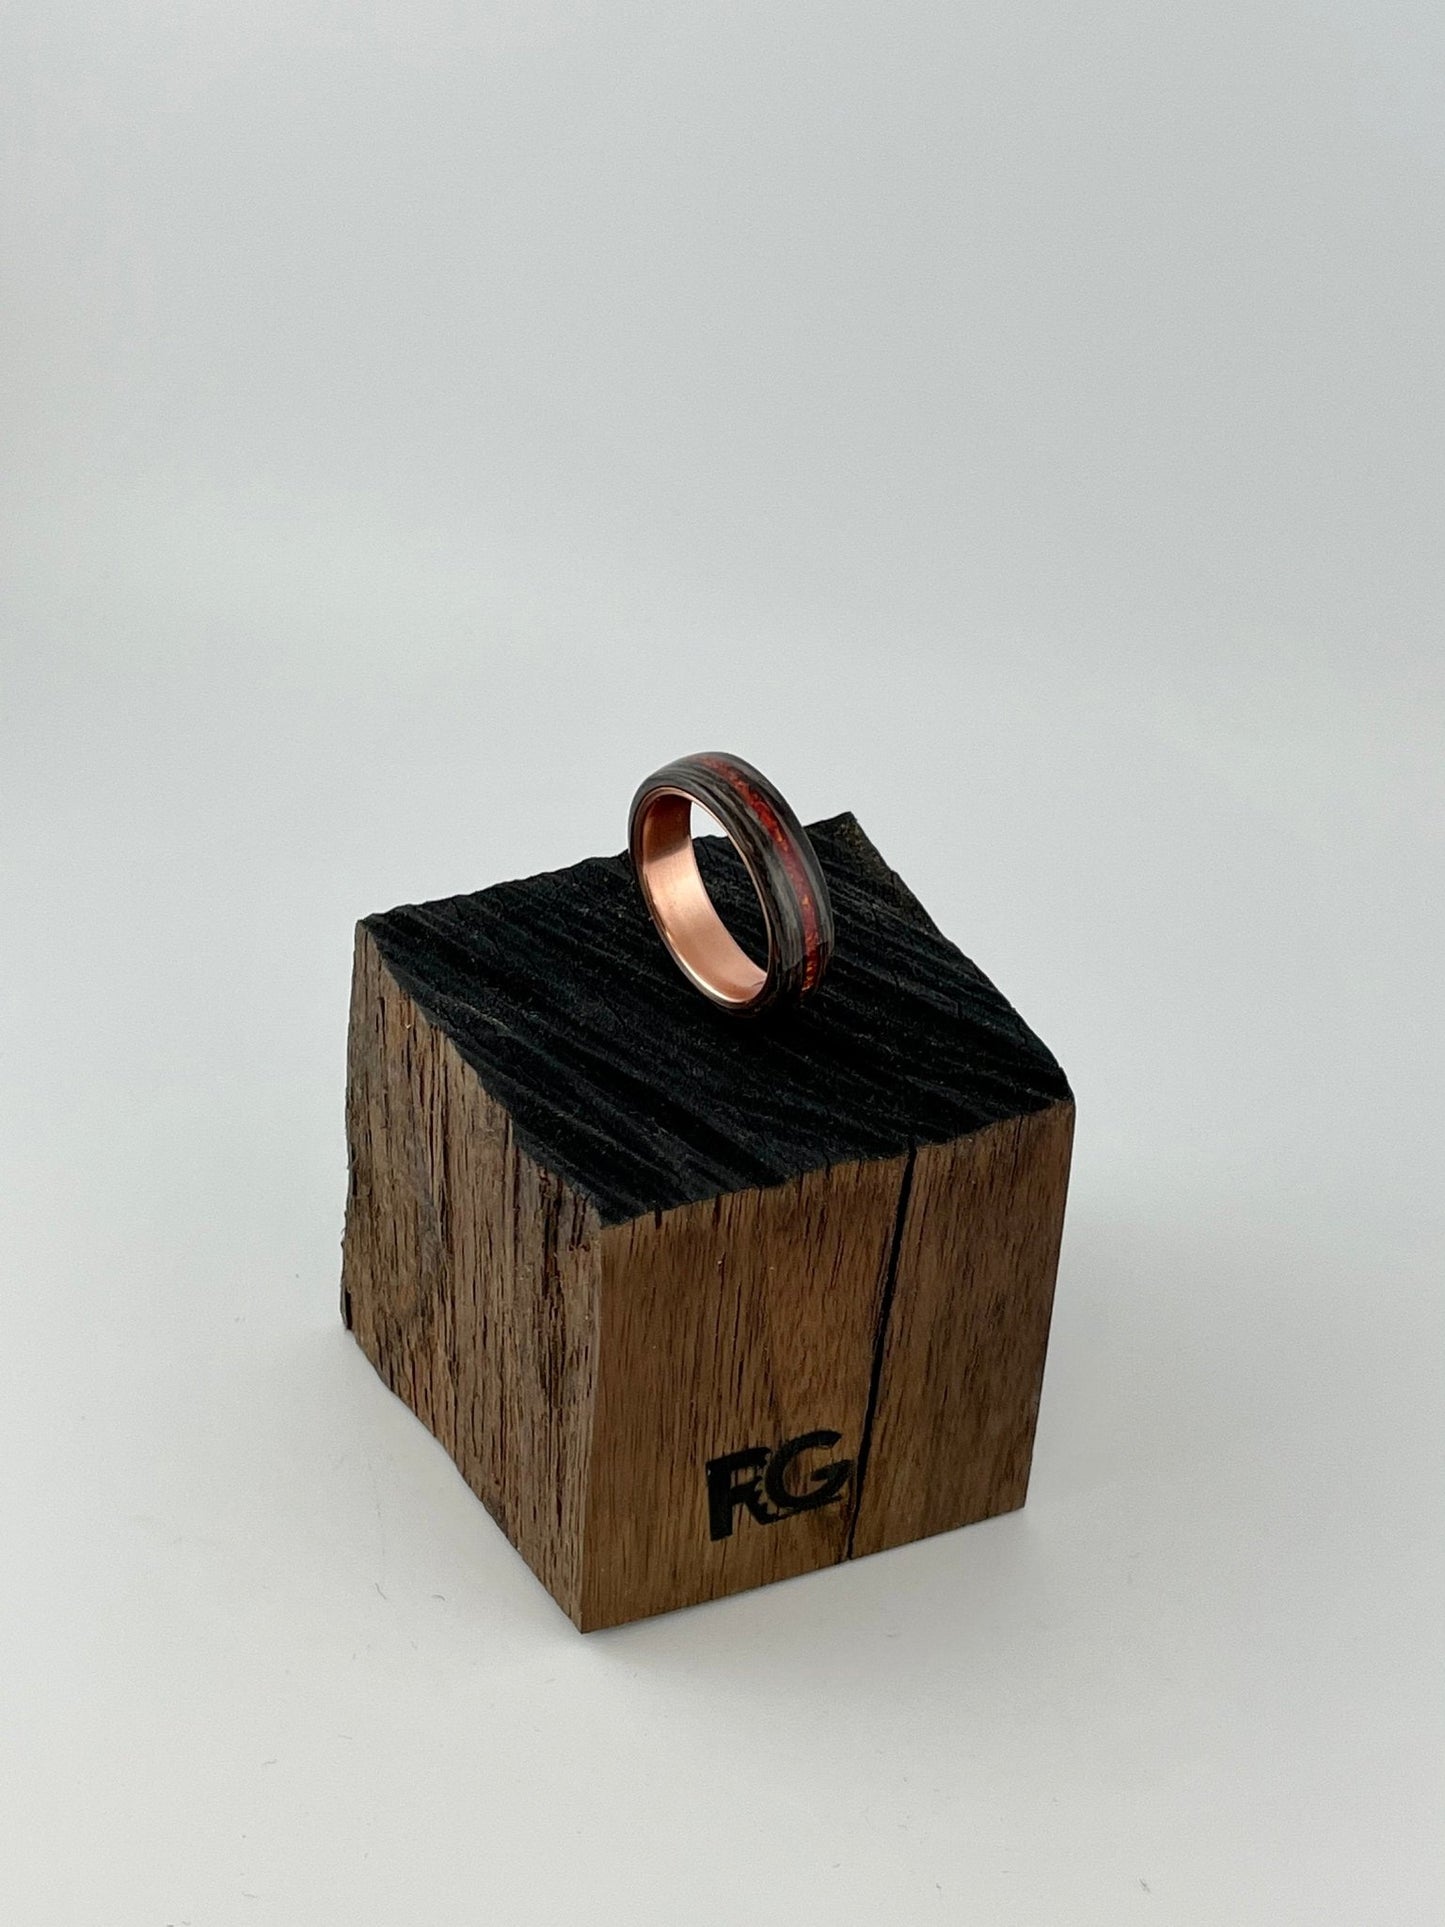 Bog Oak Crushed ruby red opal ring - Bentwood ring - Opal inlay ring - Rude GrainJewelry